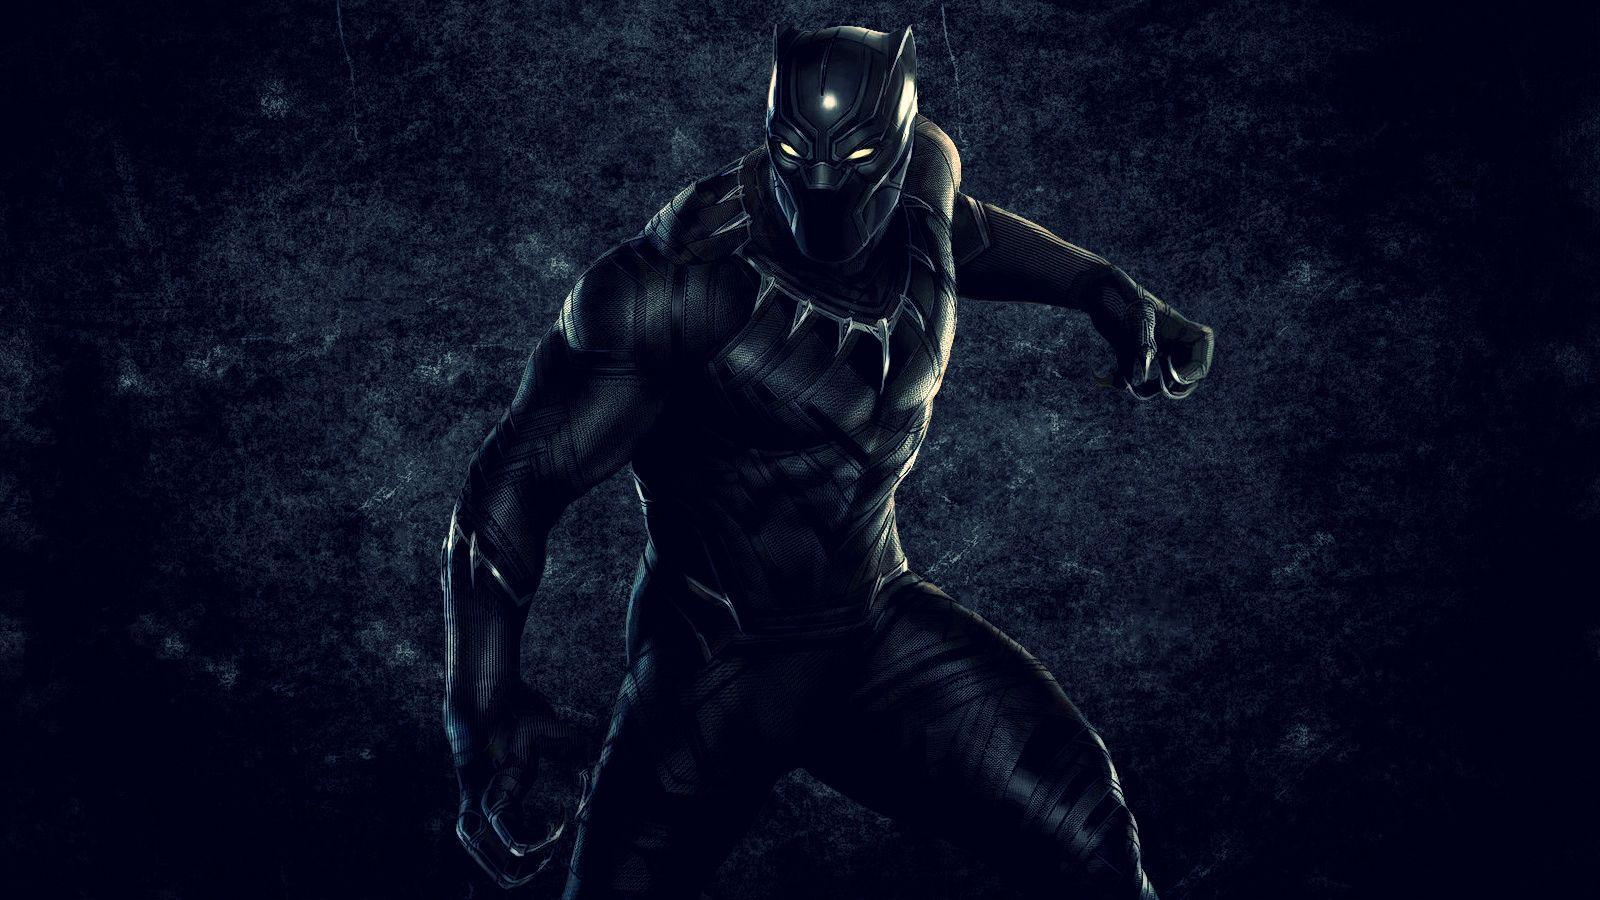 Cute Black Panther Wallpaper Free Cute Black Panther Background